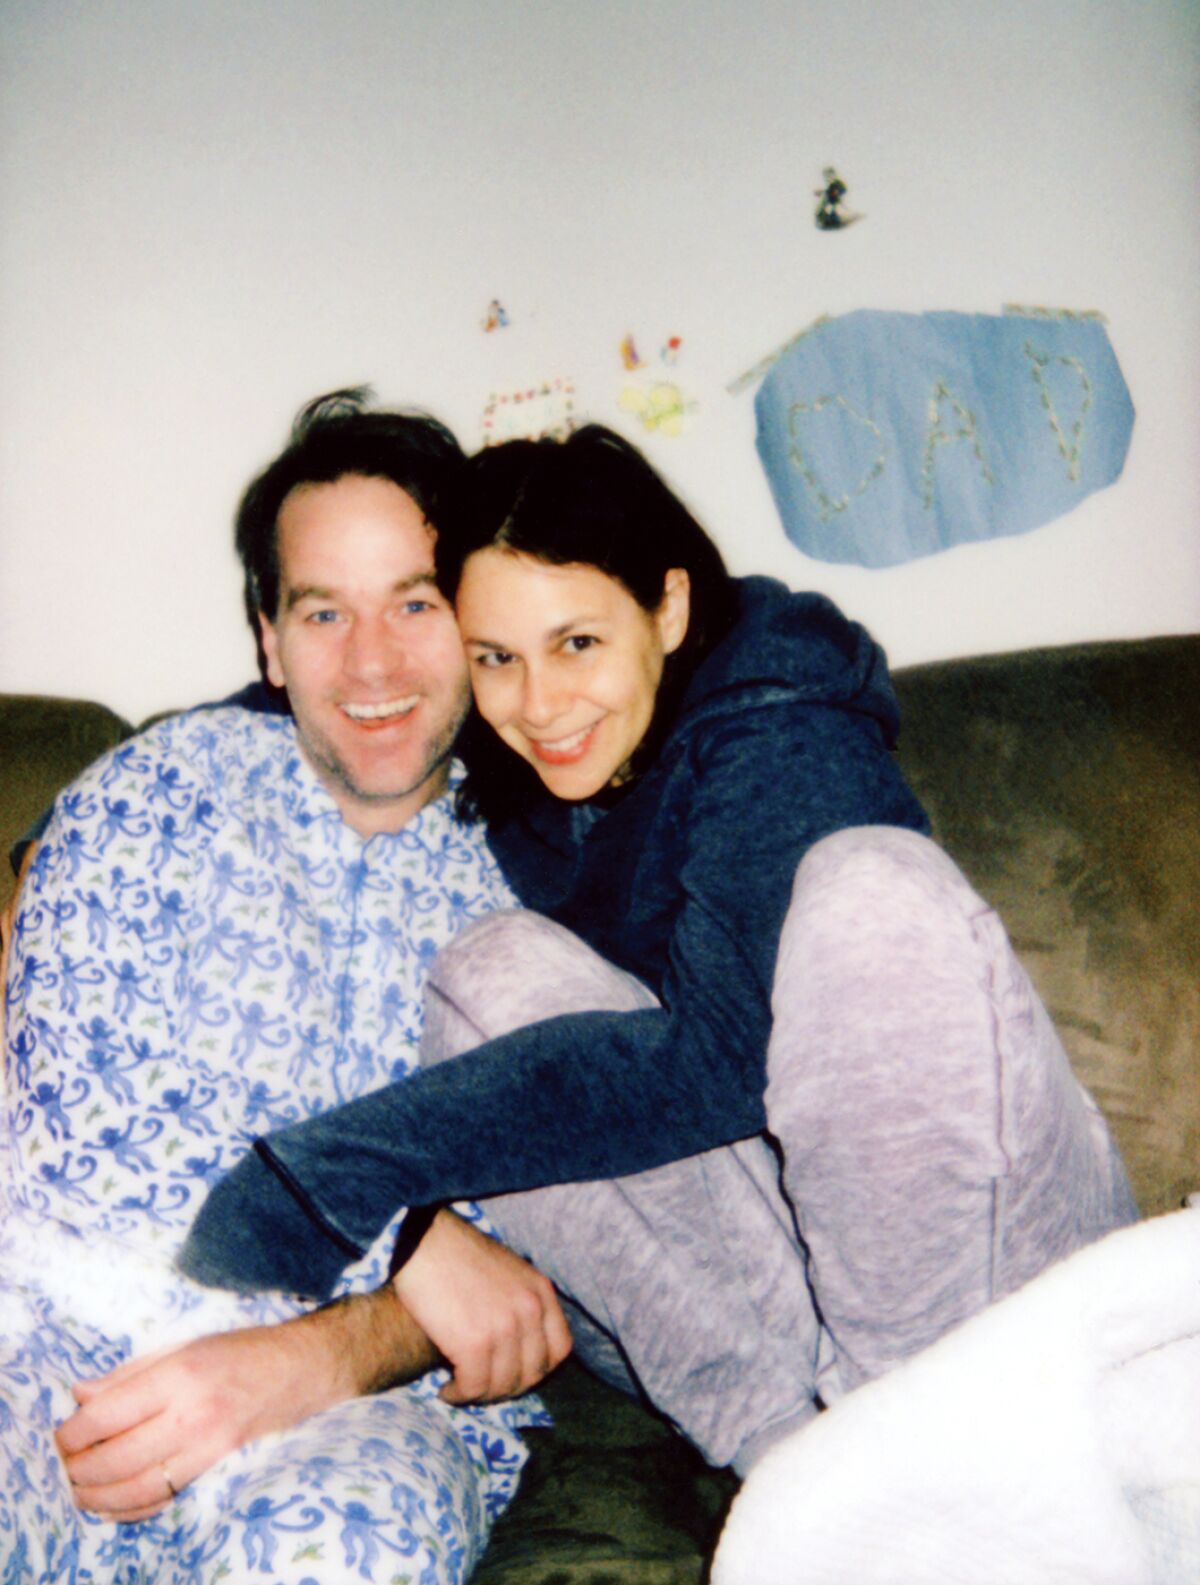 Mike Birbiglia and his wife, poet J. Hope Stein, whose verse is sprinkled liberally throughout his memoir, "The New One."